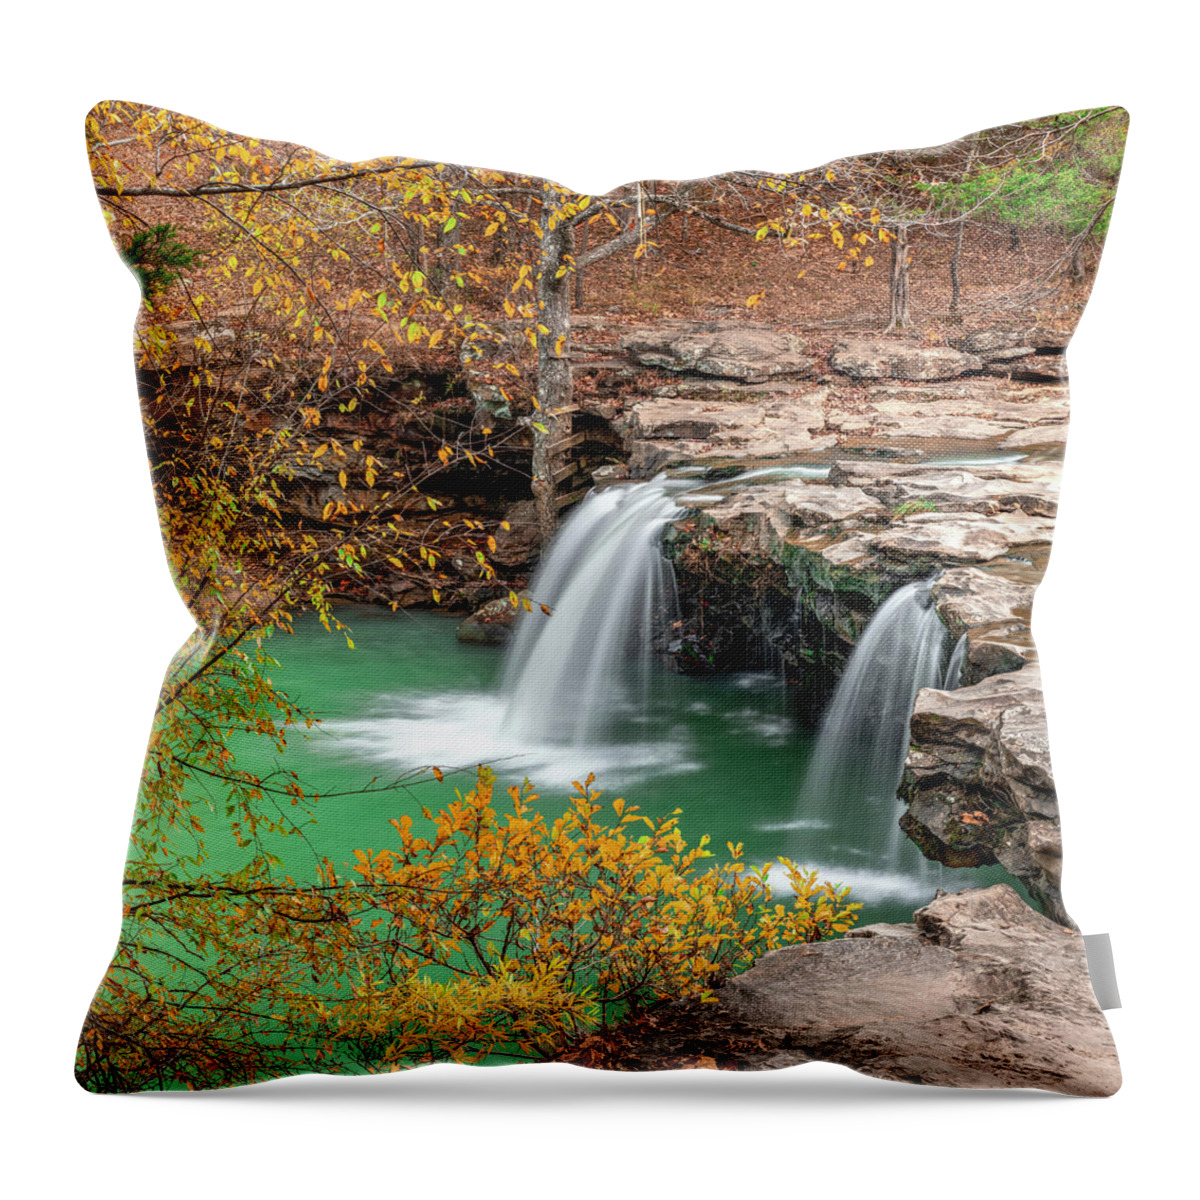 Falling Water Falls Throw Pillow featuring the photograph Arkansas Falling Water Falls In Autumn - Ozark National Forest 1x1 by Gregory Ballos